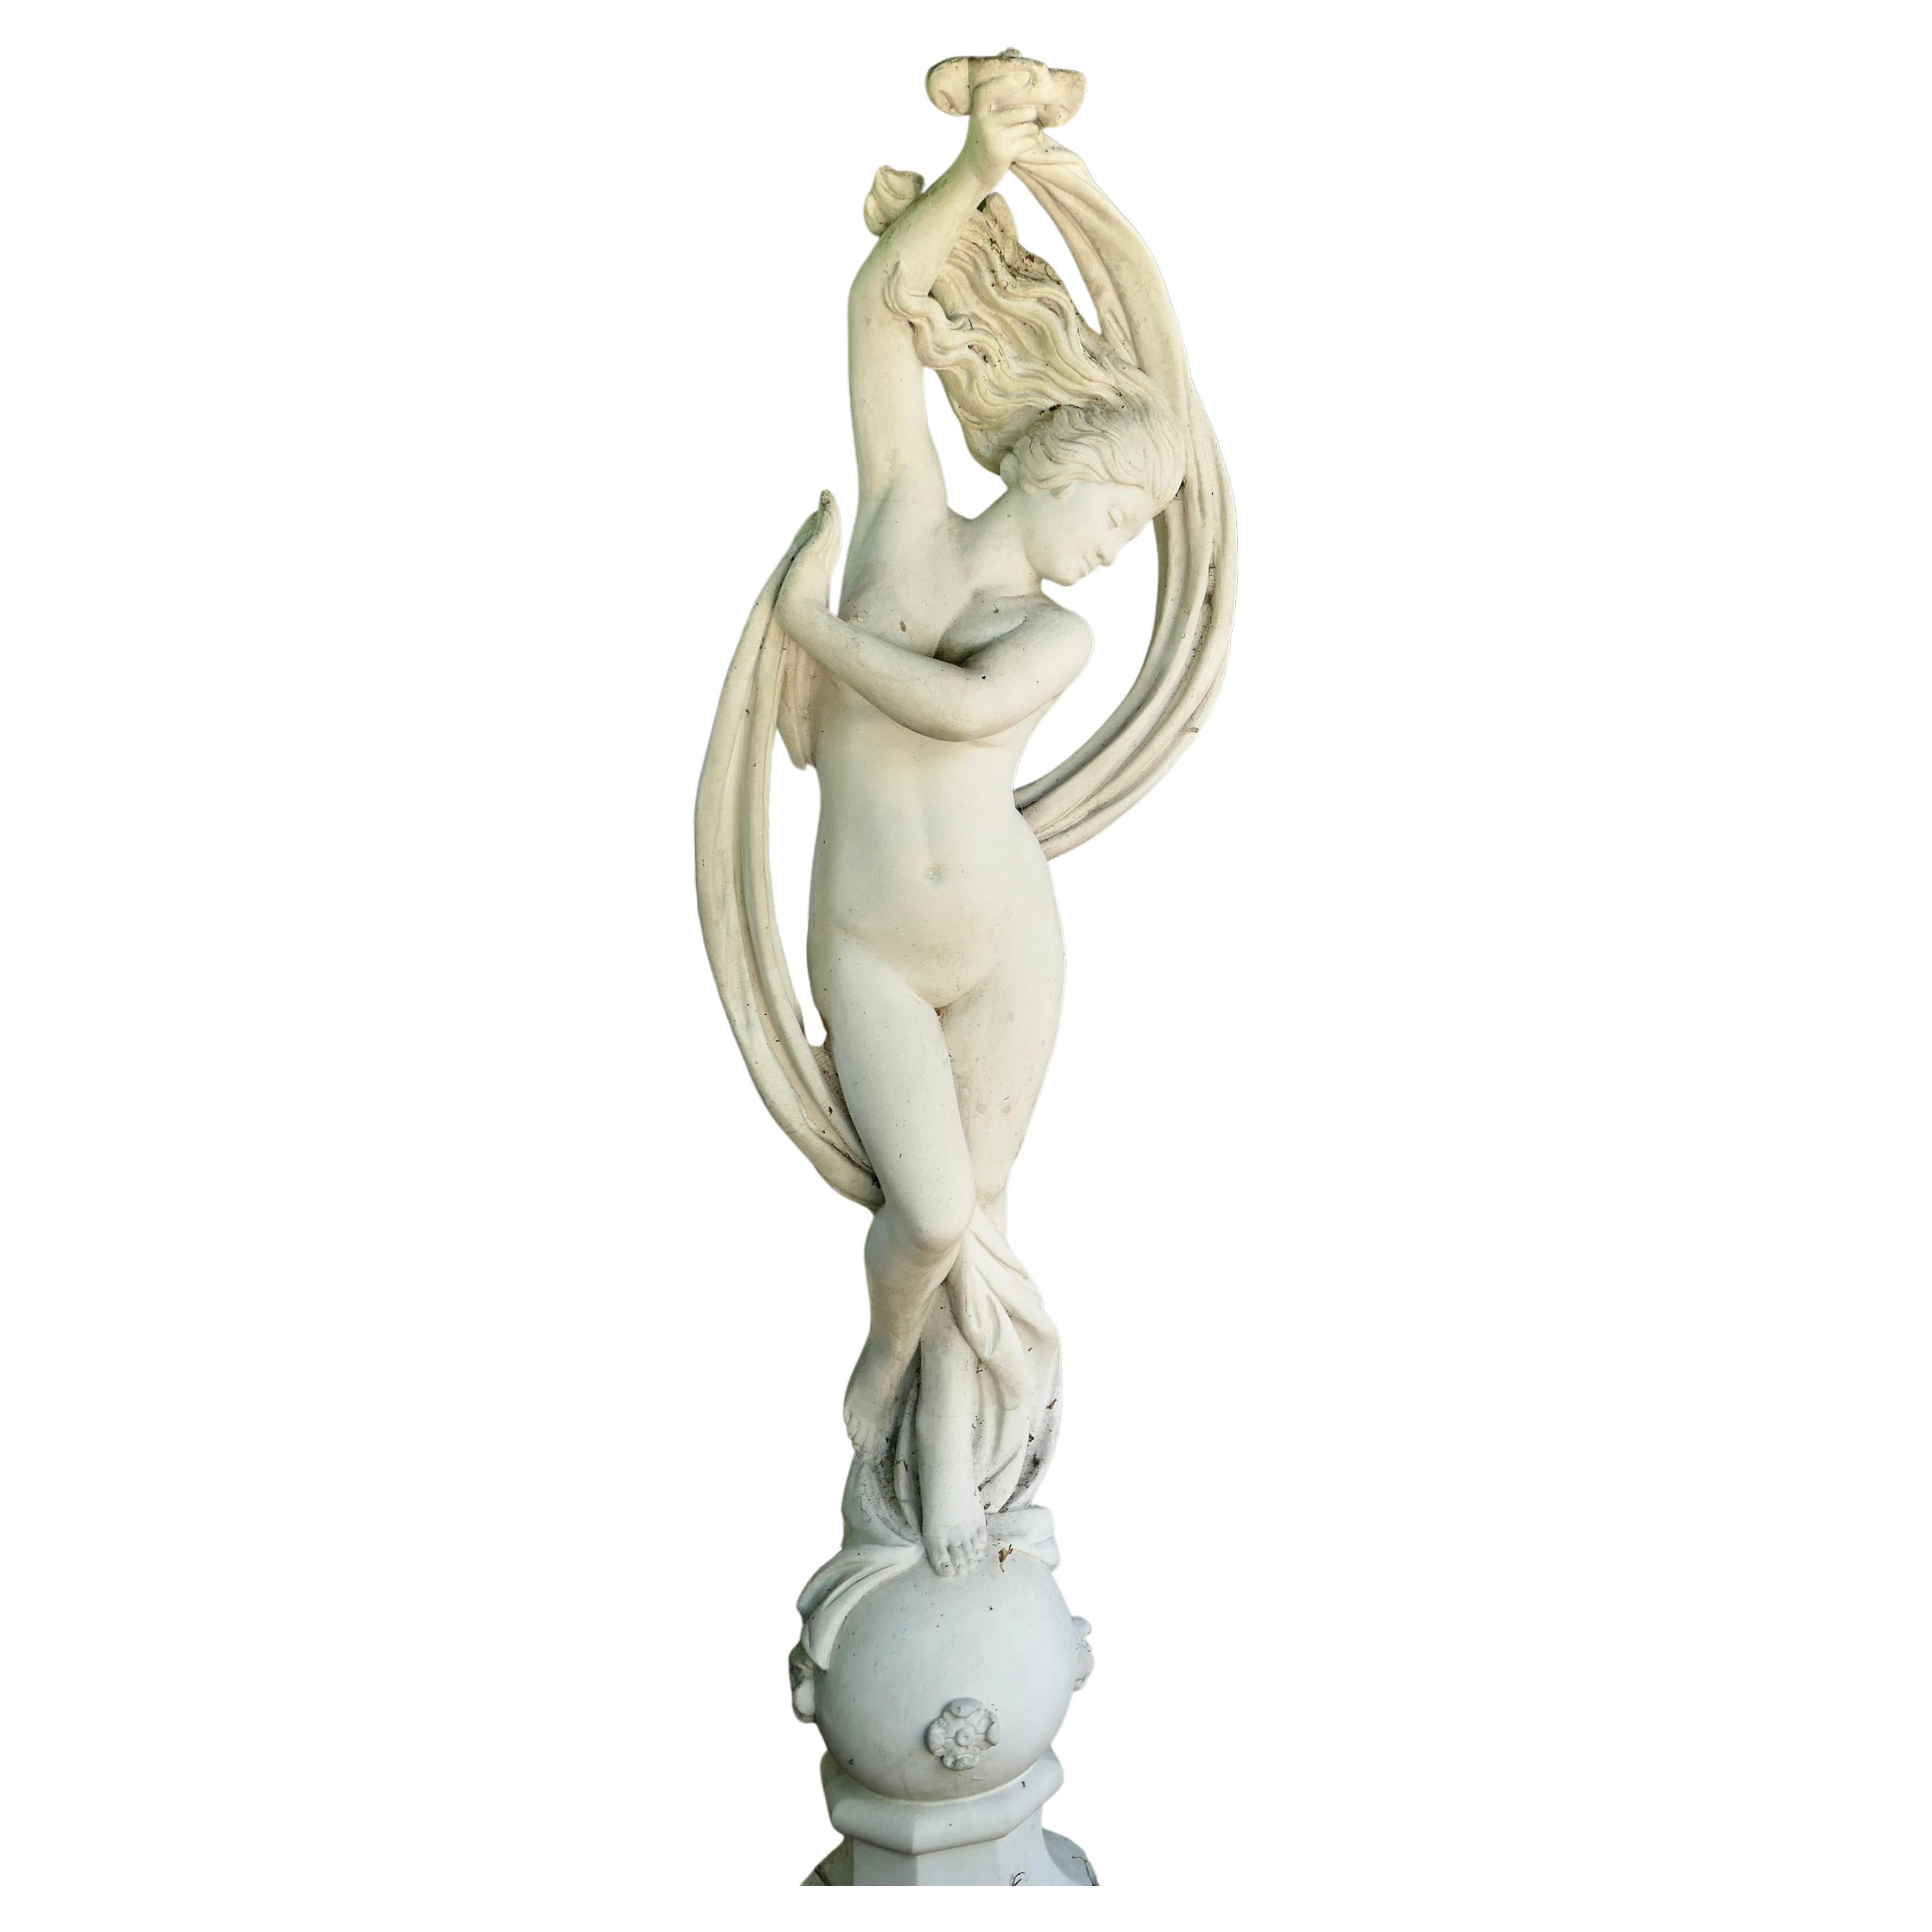 A dancing maiden marble sculpture By Papini

A signed marble “di latte” (crushed composite marble) sculpture.
The sculpture is of a young dancer swirling her ribbons and and her hair flowing, she is posing on a ball decorated with Roses, like the